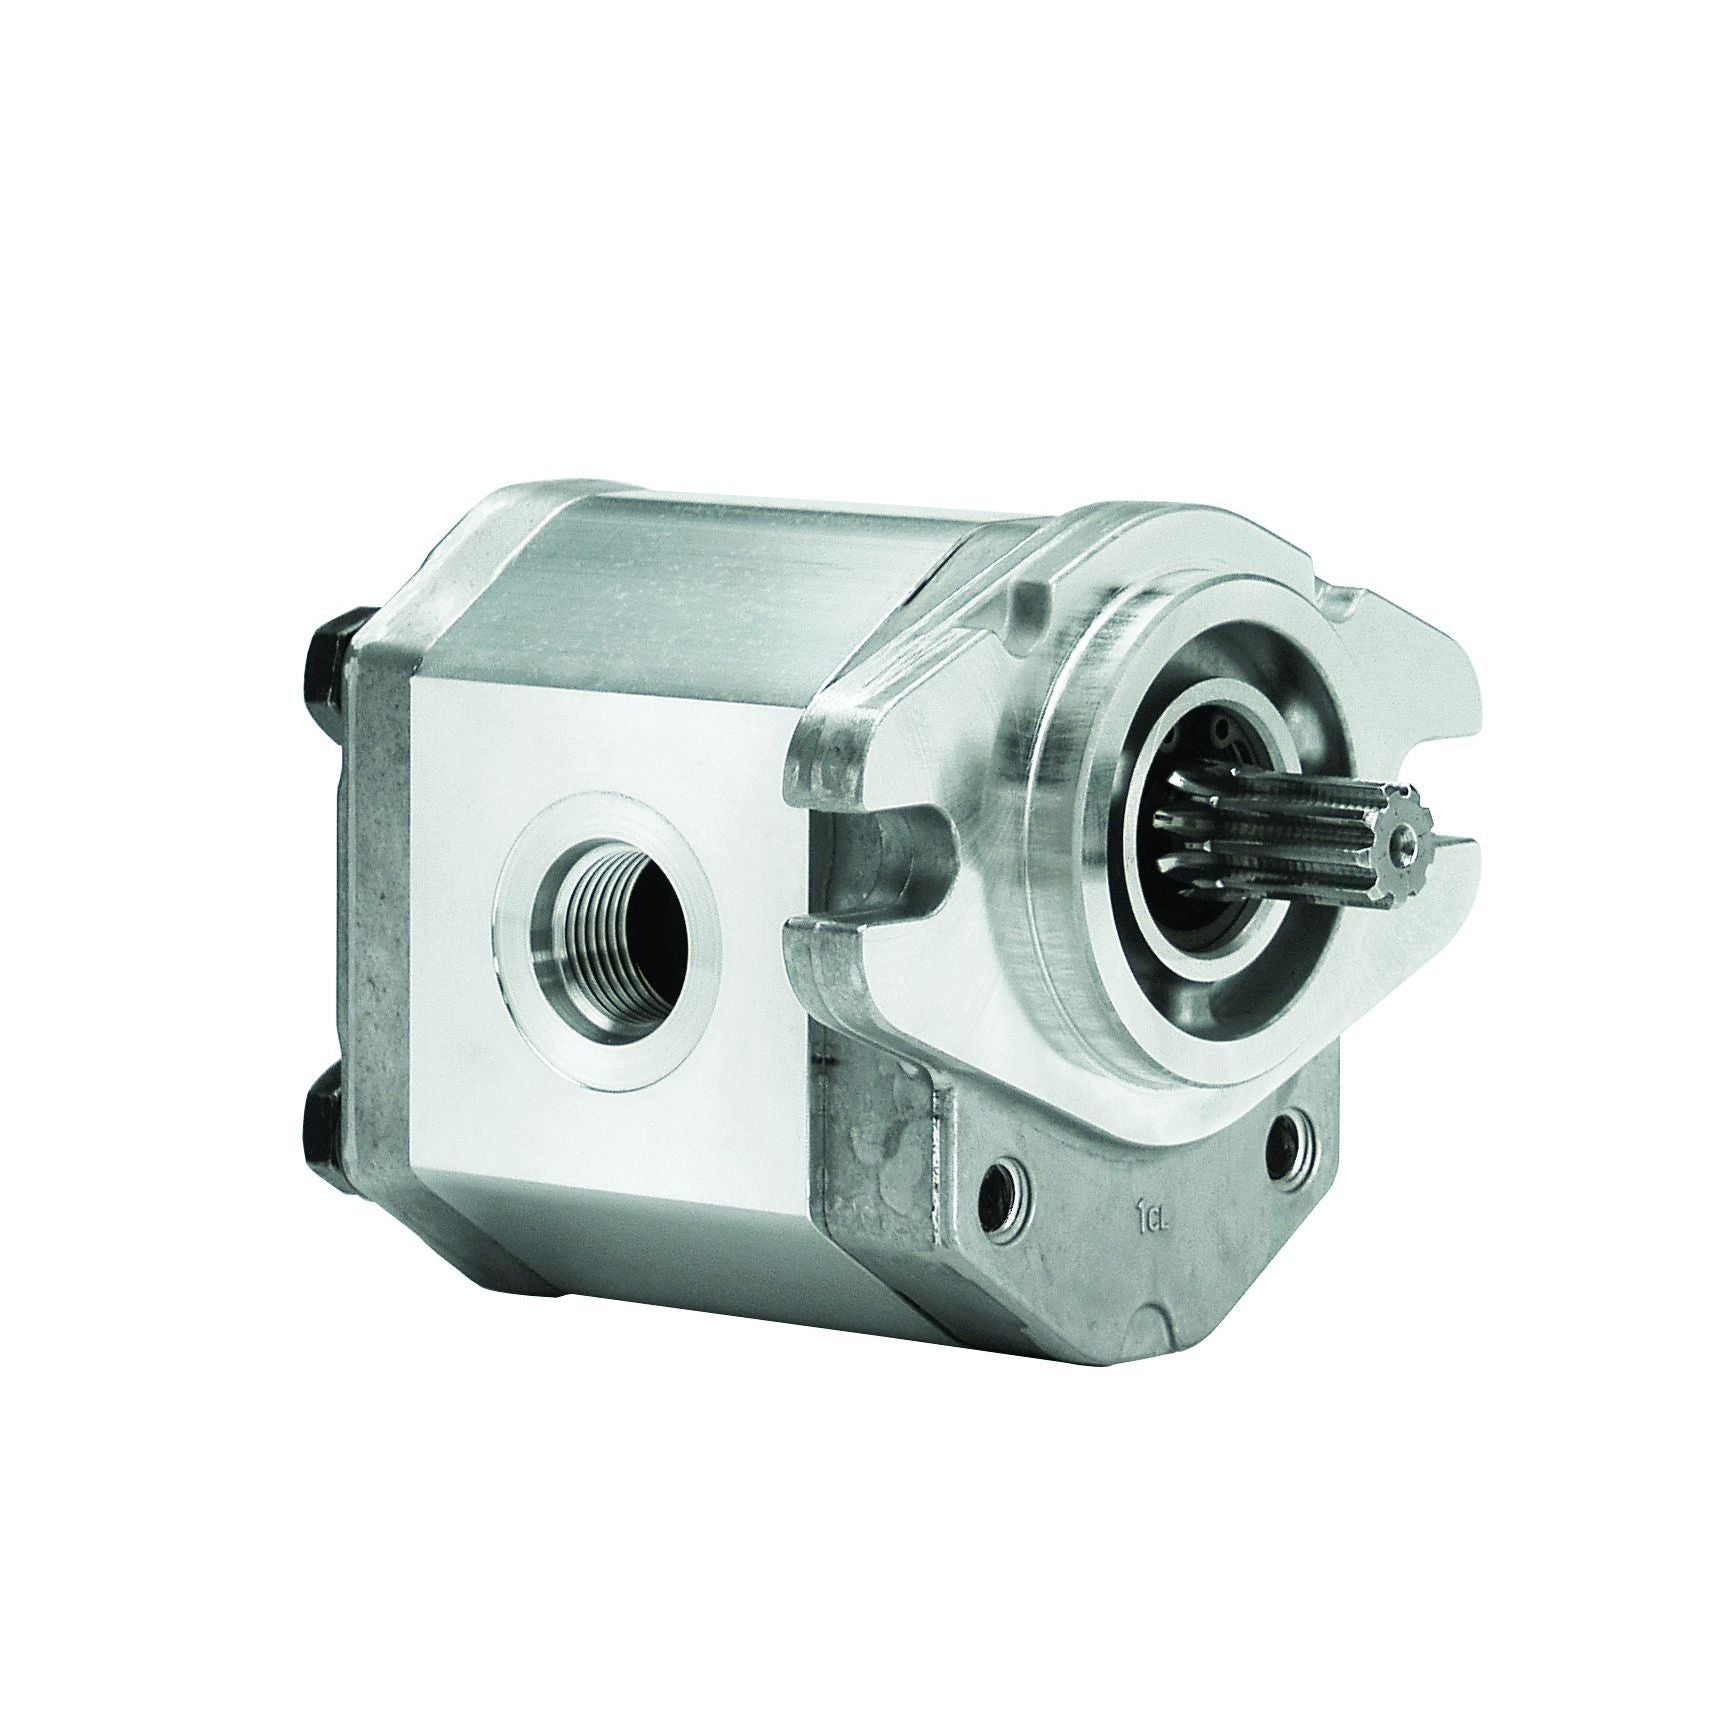 ALP2A-S-10-S1 : Marzocchi Gear Pump, CCW, 7cc (0.427in3), 3.33 GPM, 3625psi, 4000 RPM, #12 SAE (3/4") In, #10 SAE (5/8") Out, Splined Shaft 9T 16/32DP, SAE A 2-Bolt Mount